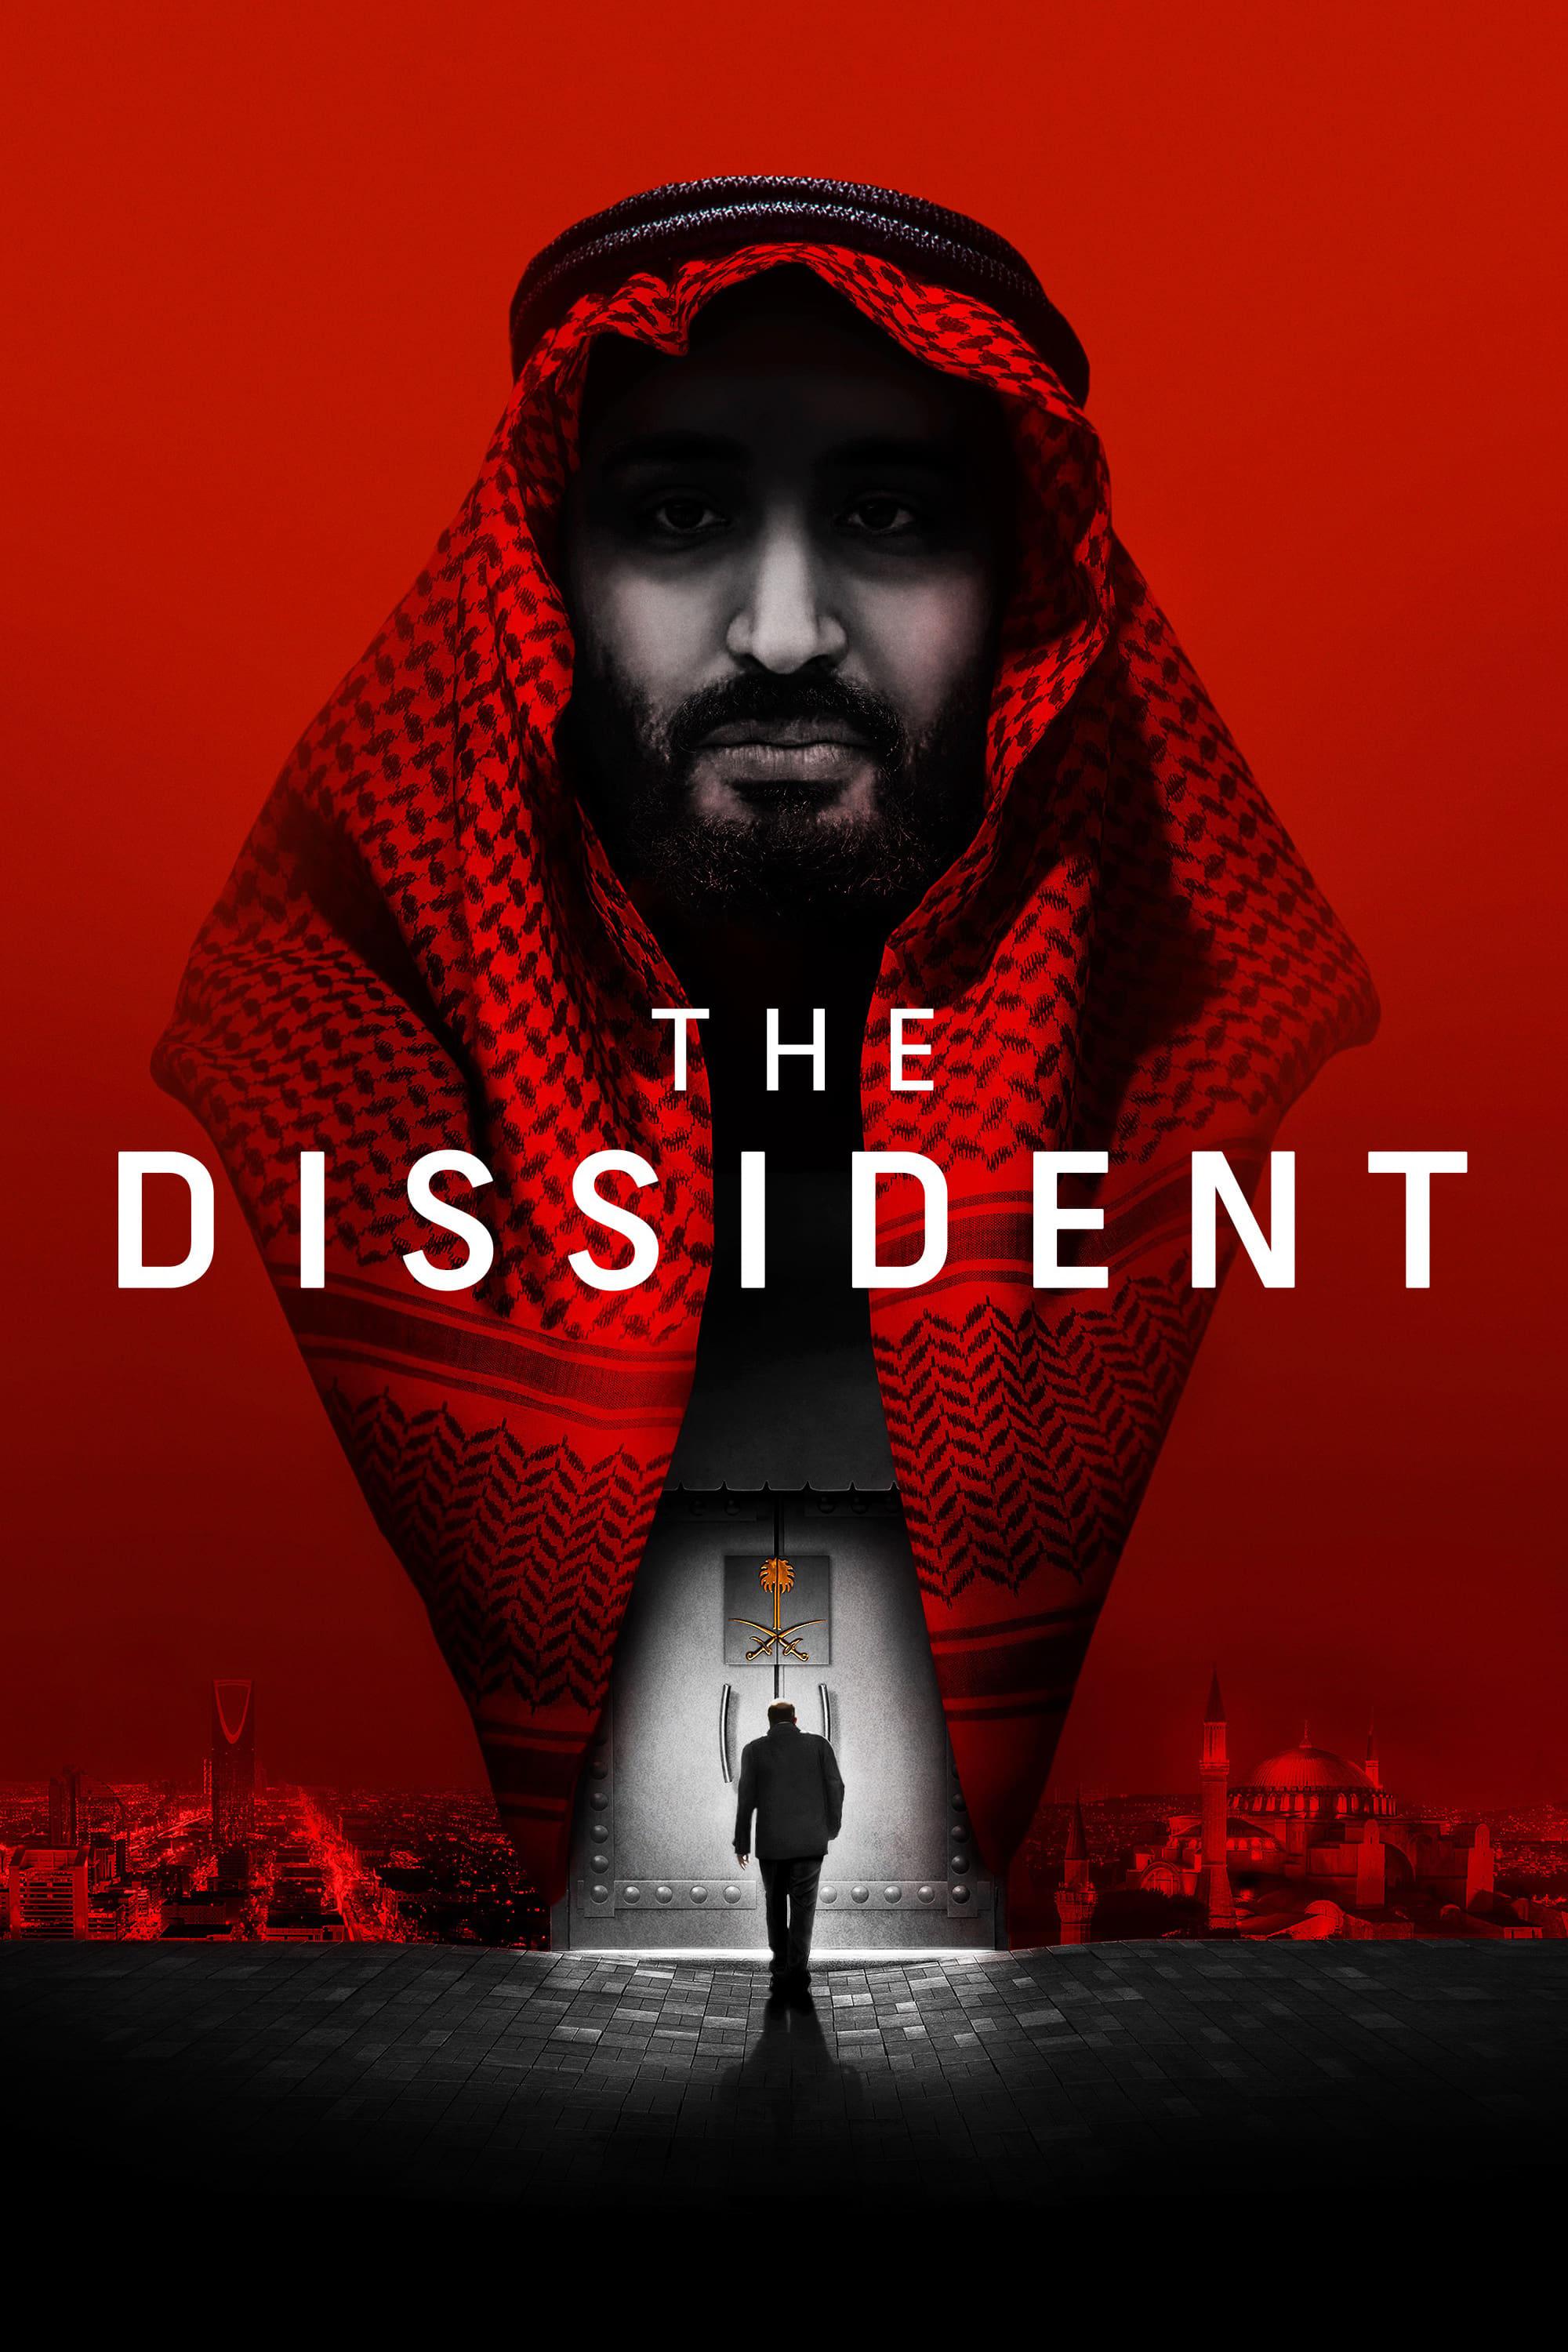 The Dissident poster